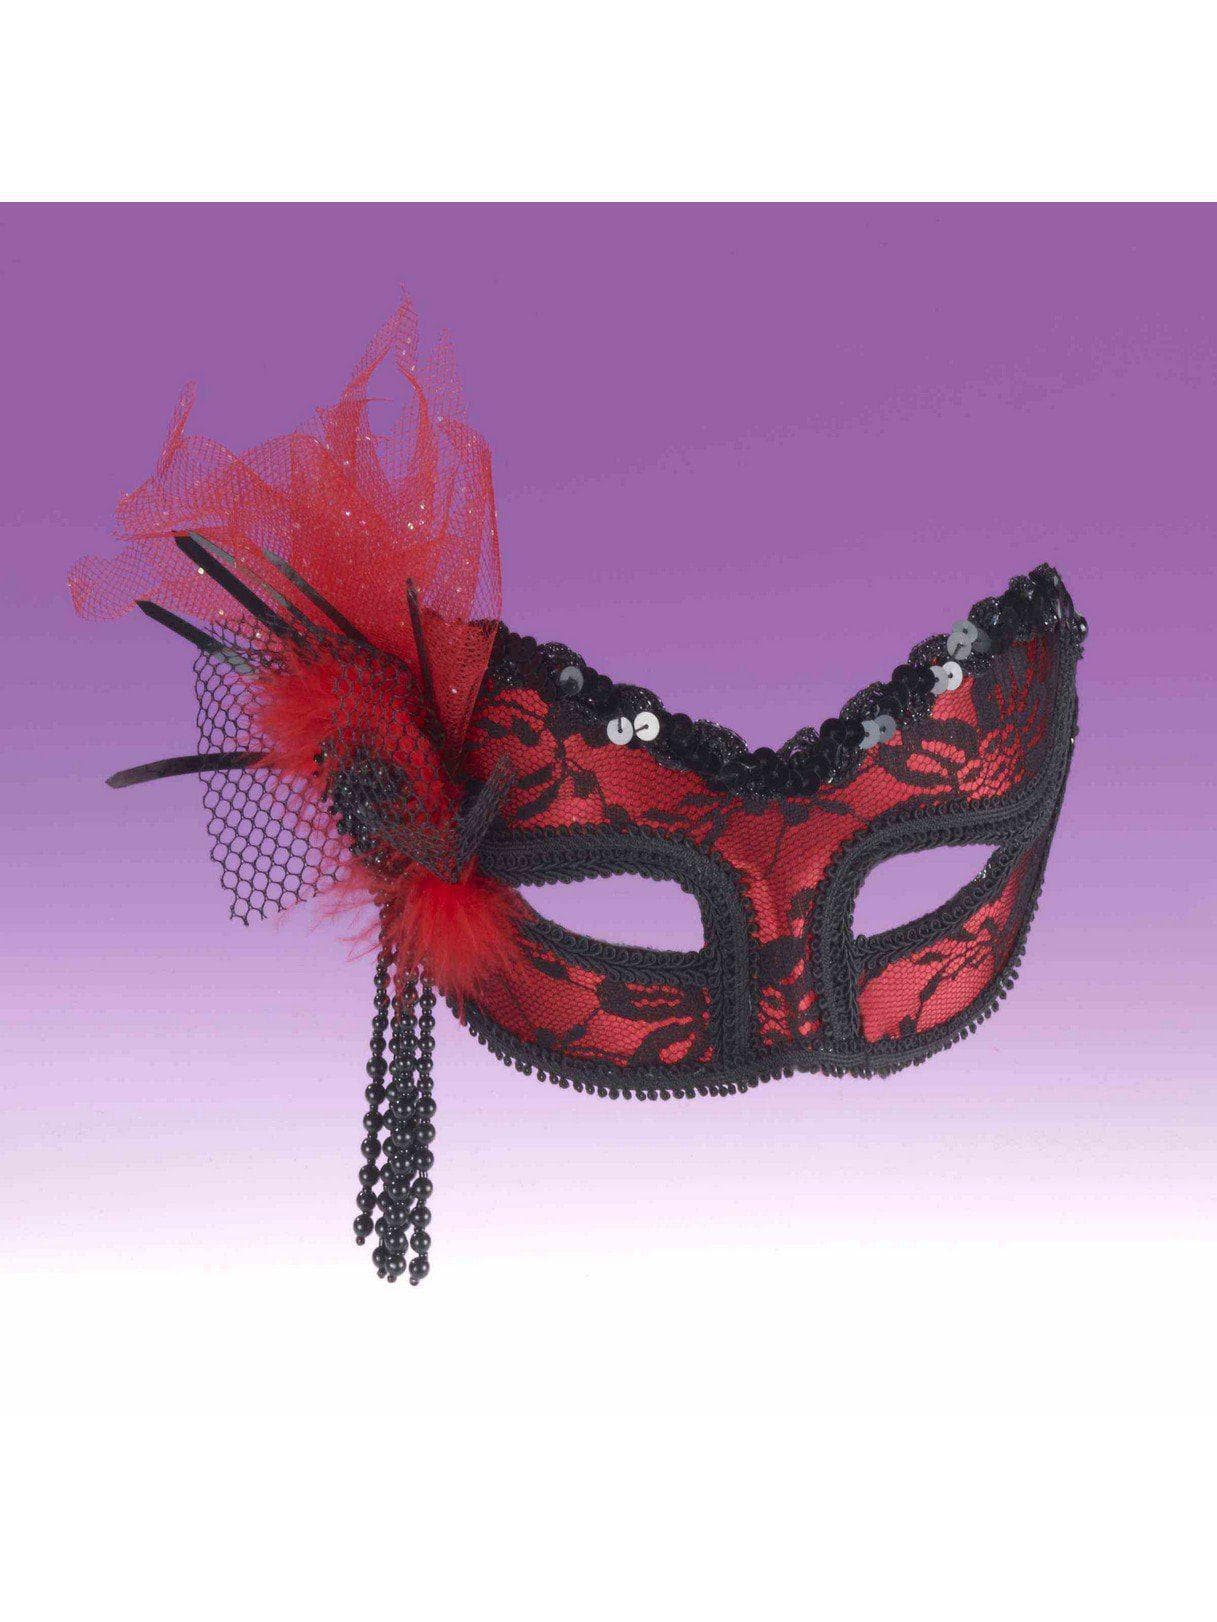 Red/Black Lace Mask - costumes.com